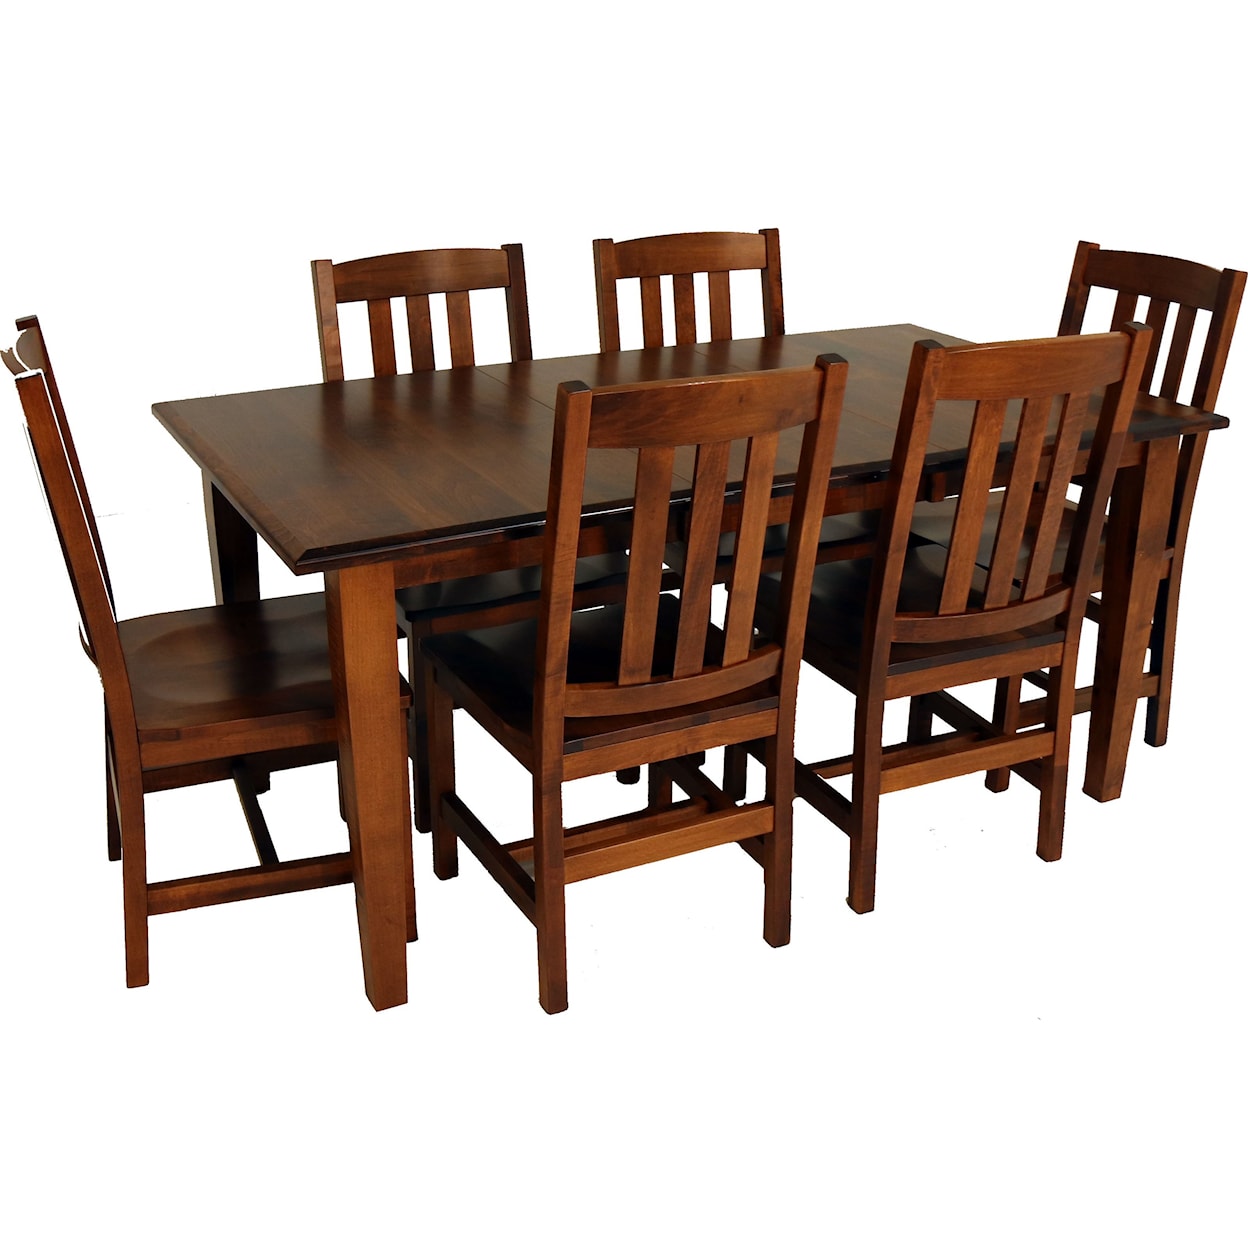 Archbold Furniture Amish Essentials Casual Dining 7-Piece Dining Set